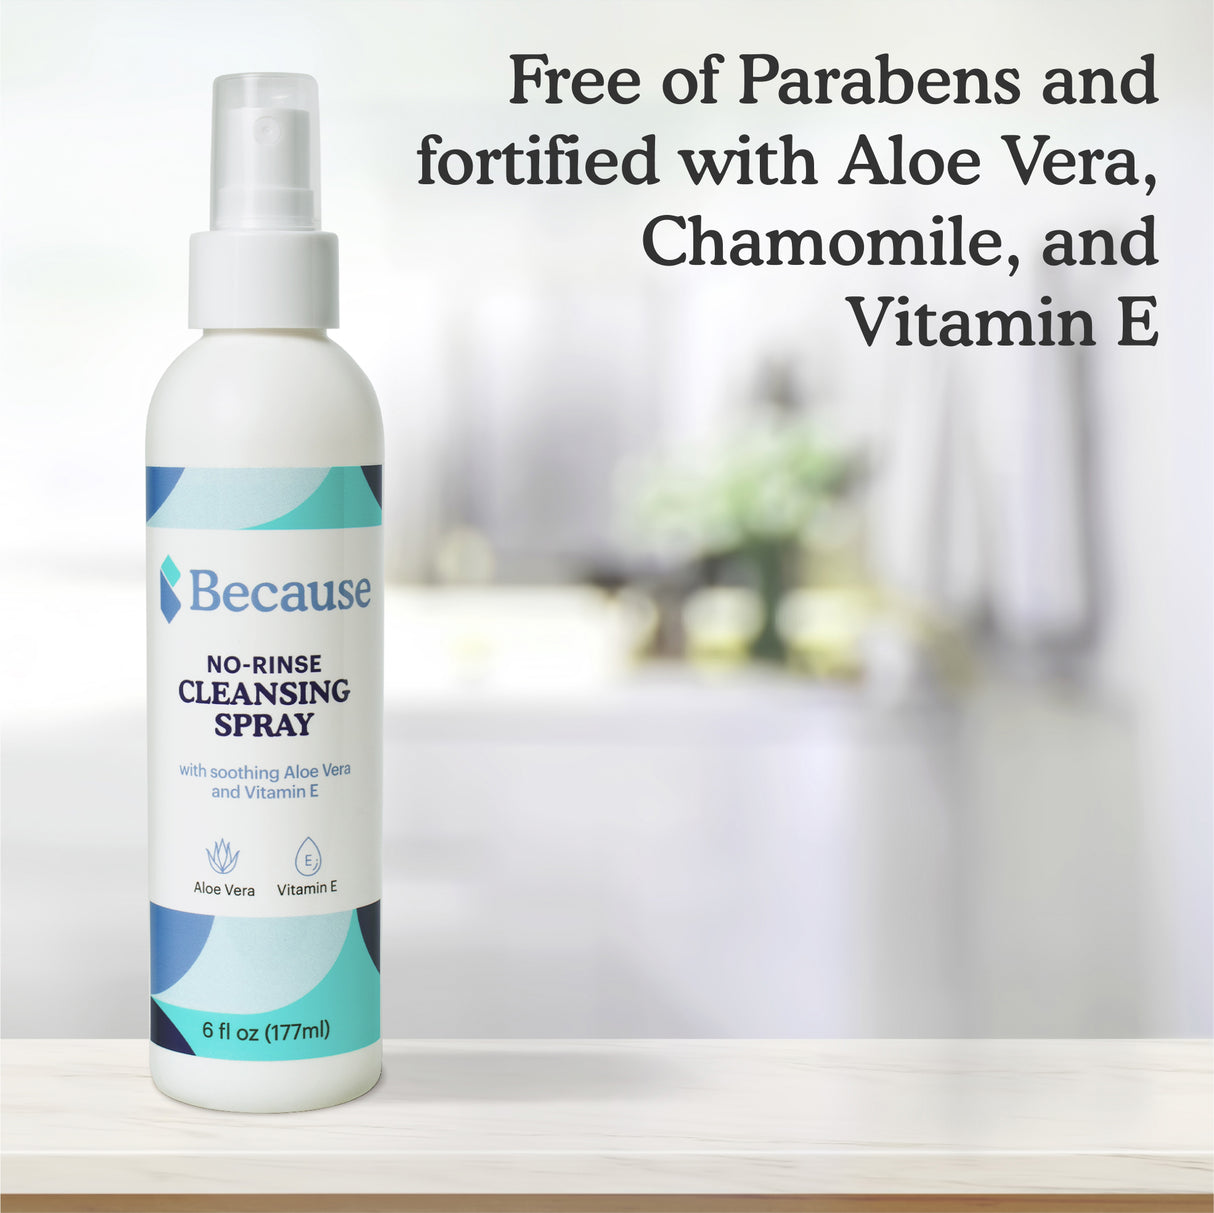 Free of parabens and fortified with Aloe vera, chamomile, and vitamin E.